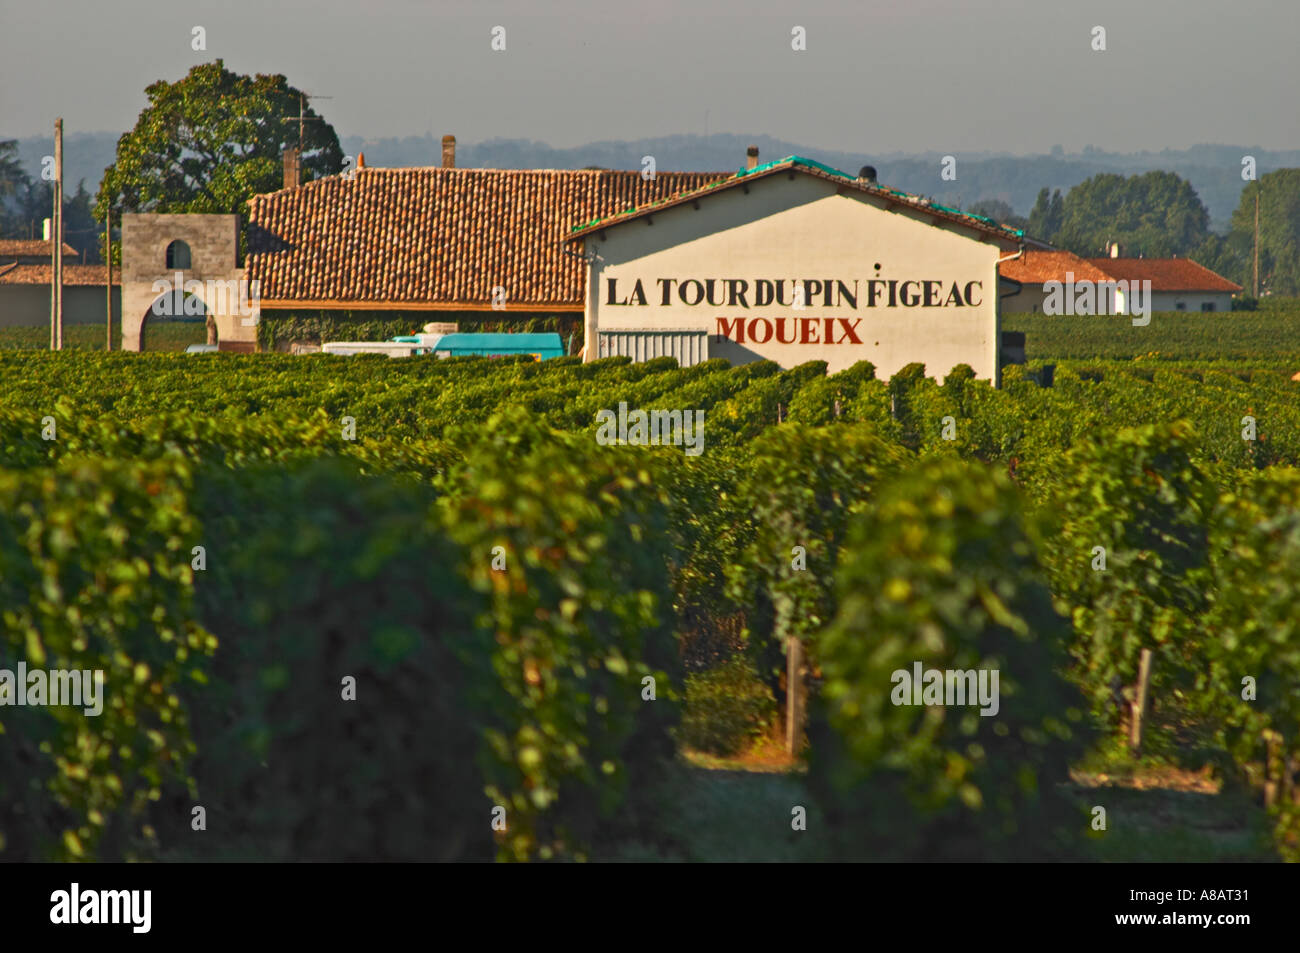 Vineyard and Chateau Latour du Pin Figeac (Moueix), as it is called, in Saint Emilion, another Moueix family property, Bordeaux Stock Photo